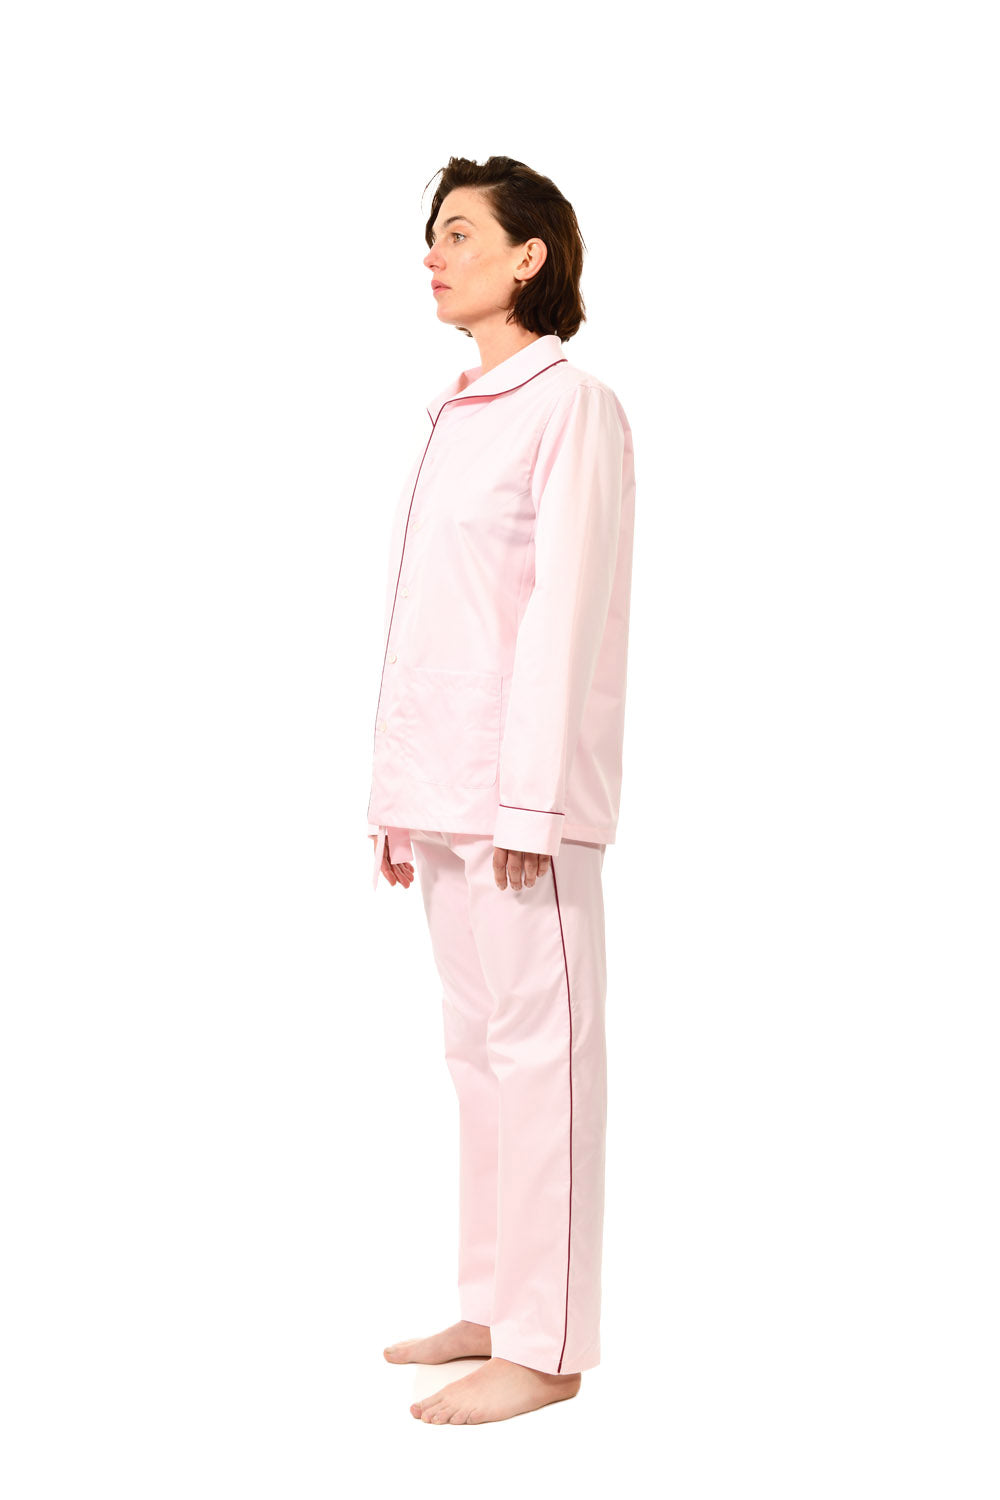 The Waldorf in light pink cotton broadcloth with burgundy piping